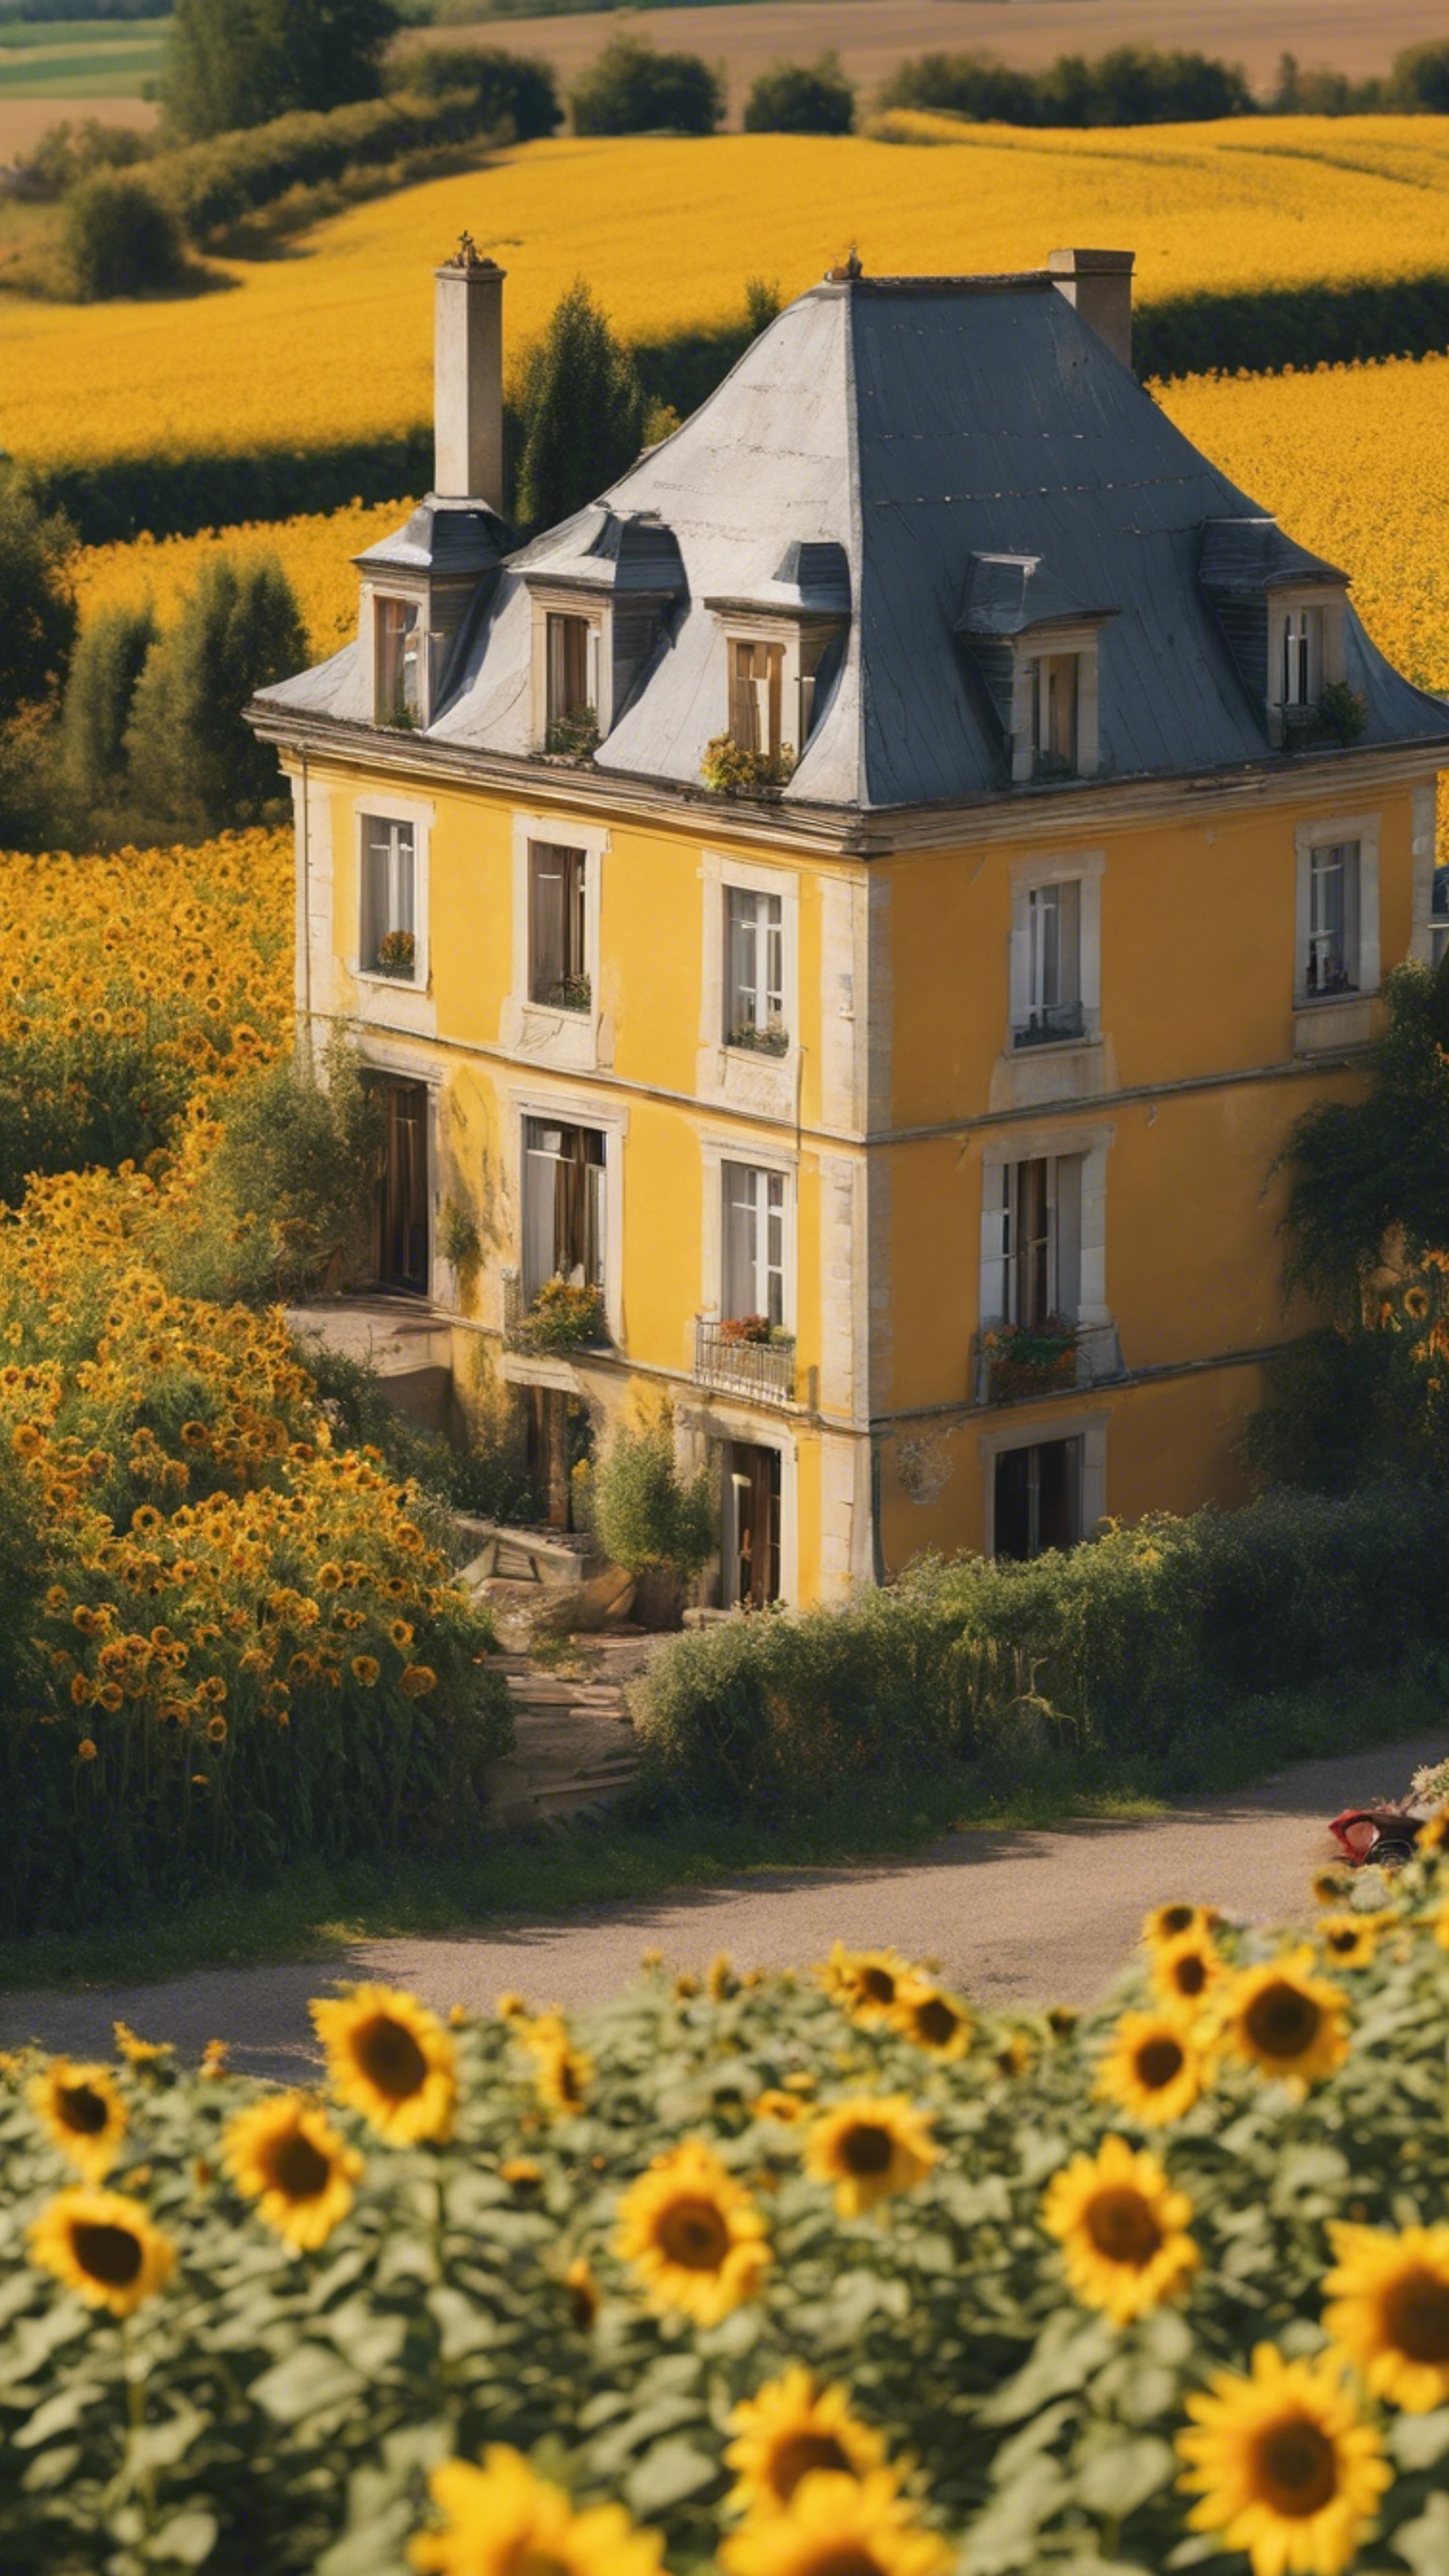 A quaint French country house nestled in a field of bright yellow sunflowers during a sunny afternoon. Tapet[7540a515ea0143d58f51]